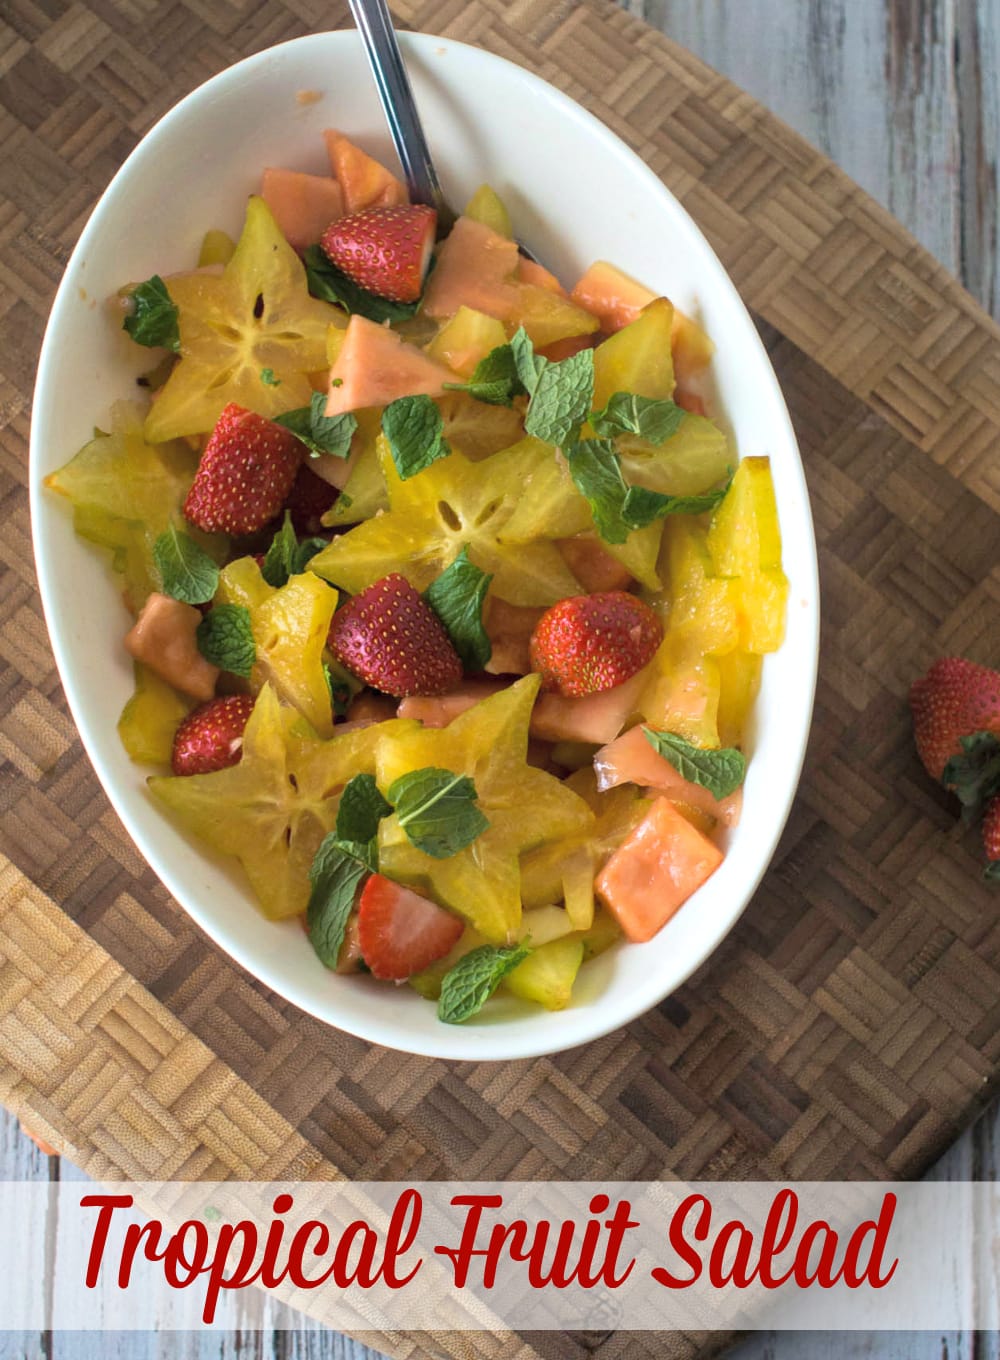 Tropical Fruit Salad - Starfruit, papaya and strawberries drizzled with lime and mint leaves